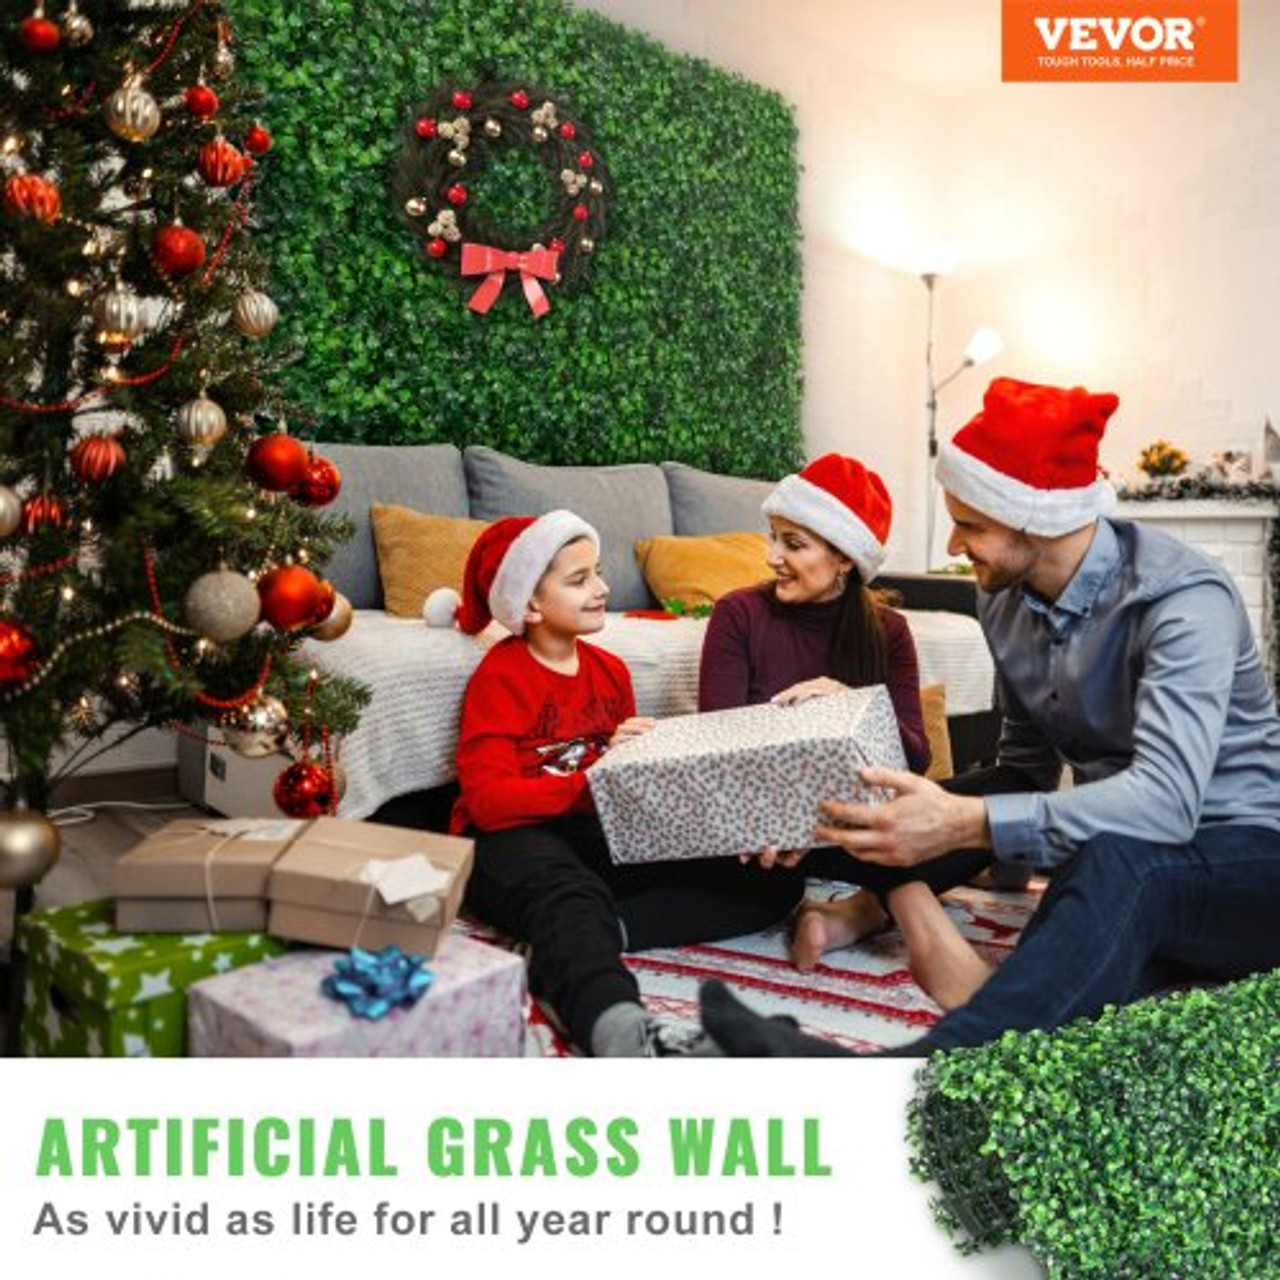 12PCS 20x20inch Artificial Boxwood Panels,Boxwood Hedge Wall Panels,Artificial Grass Backdrop Wall 1.6",Privacy Hedge Screen UV Protected for Outdoor Indoor Garden Fence Backyard